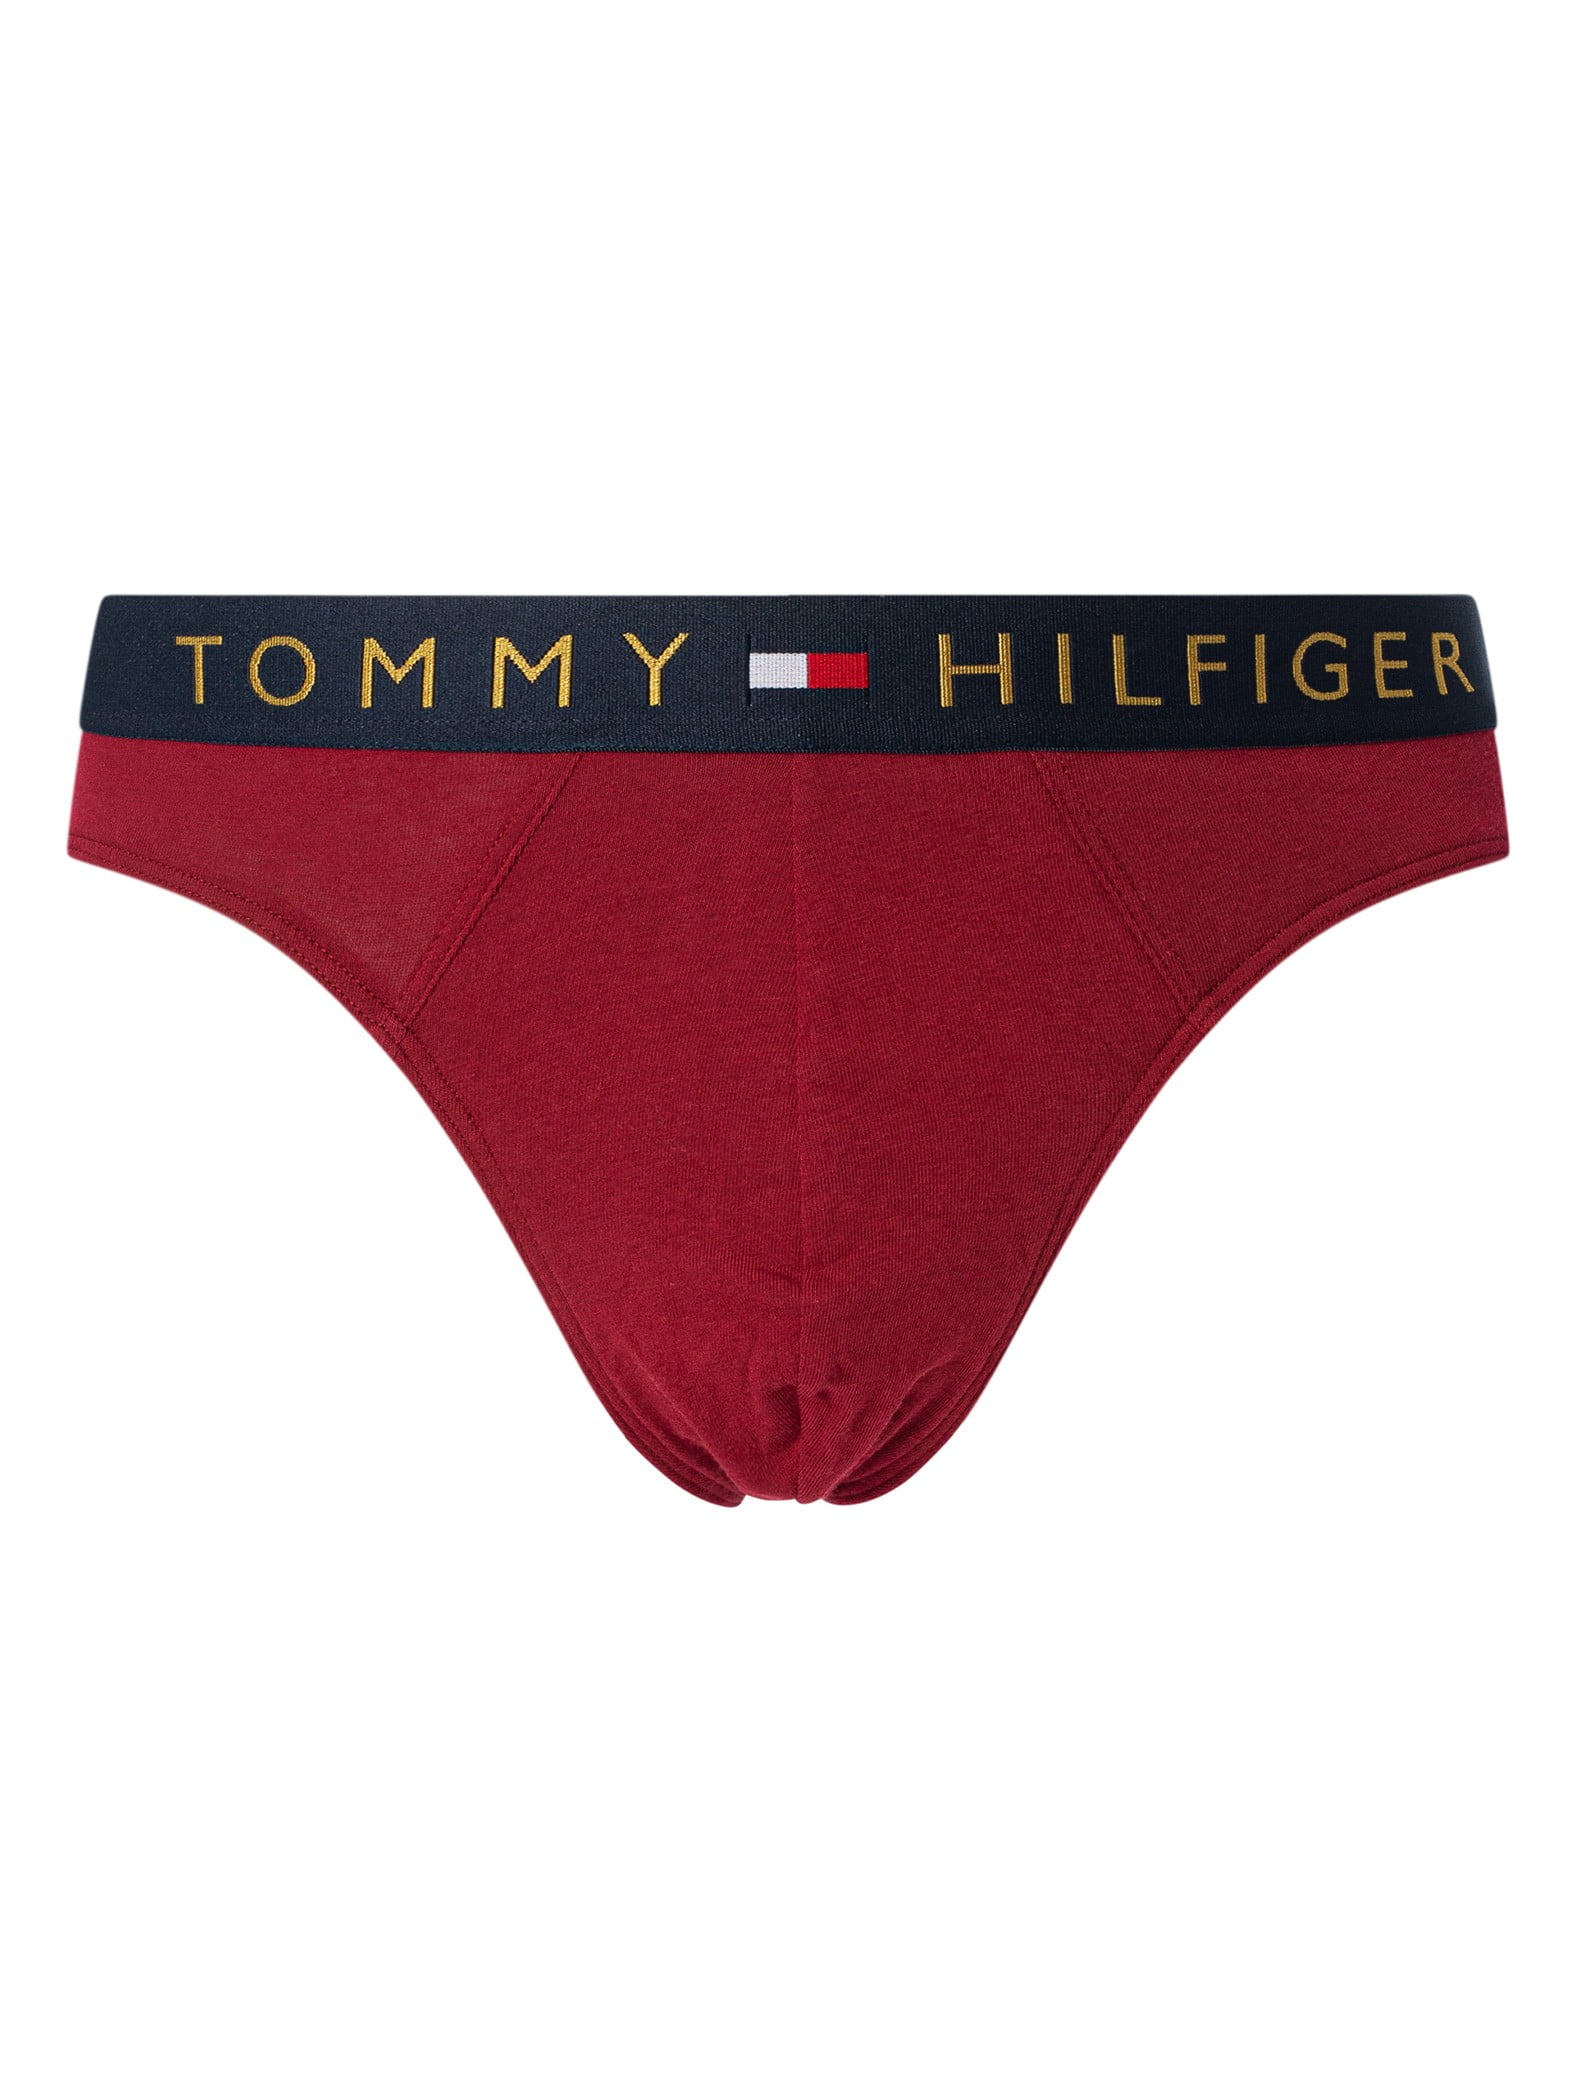 Tommy Hilfiger 5 WB Gold Pack Briefs, Multicoloured